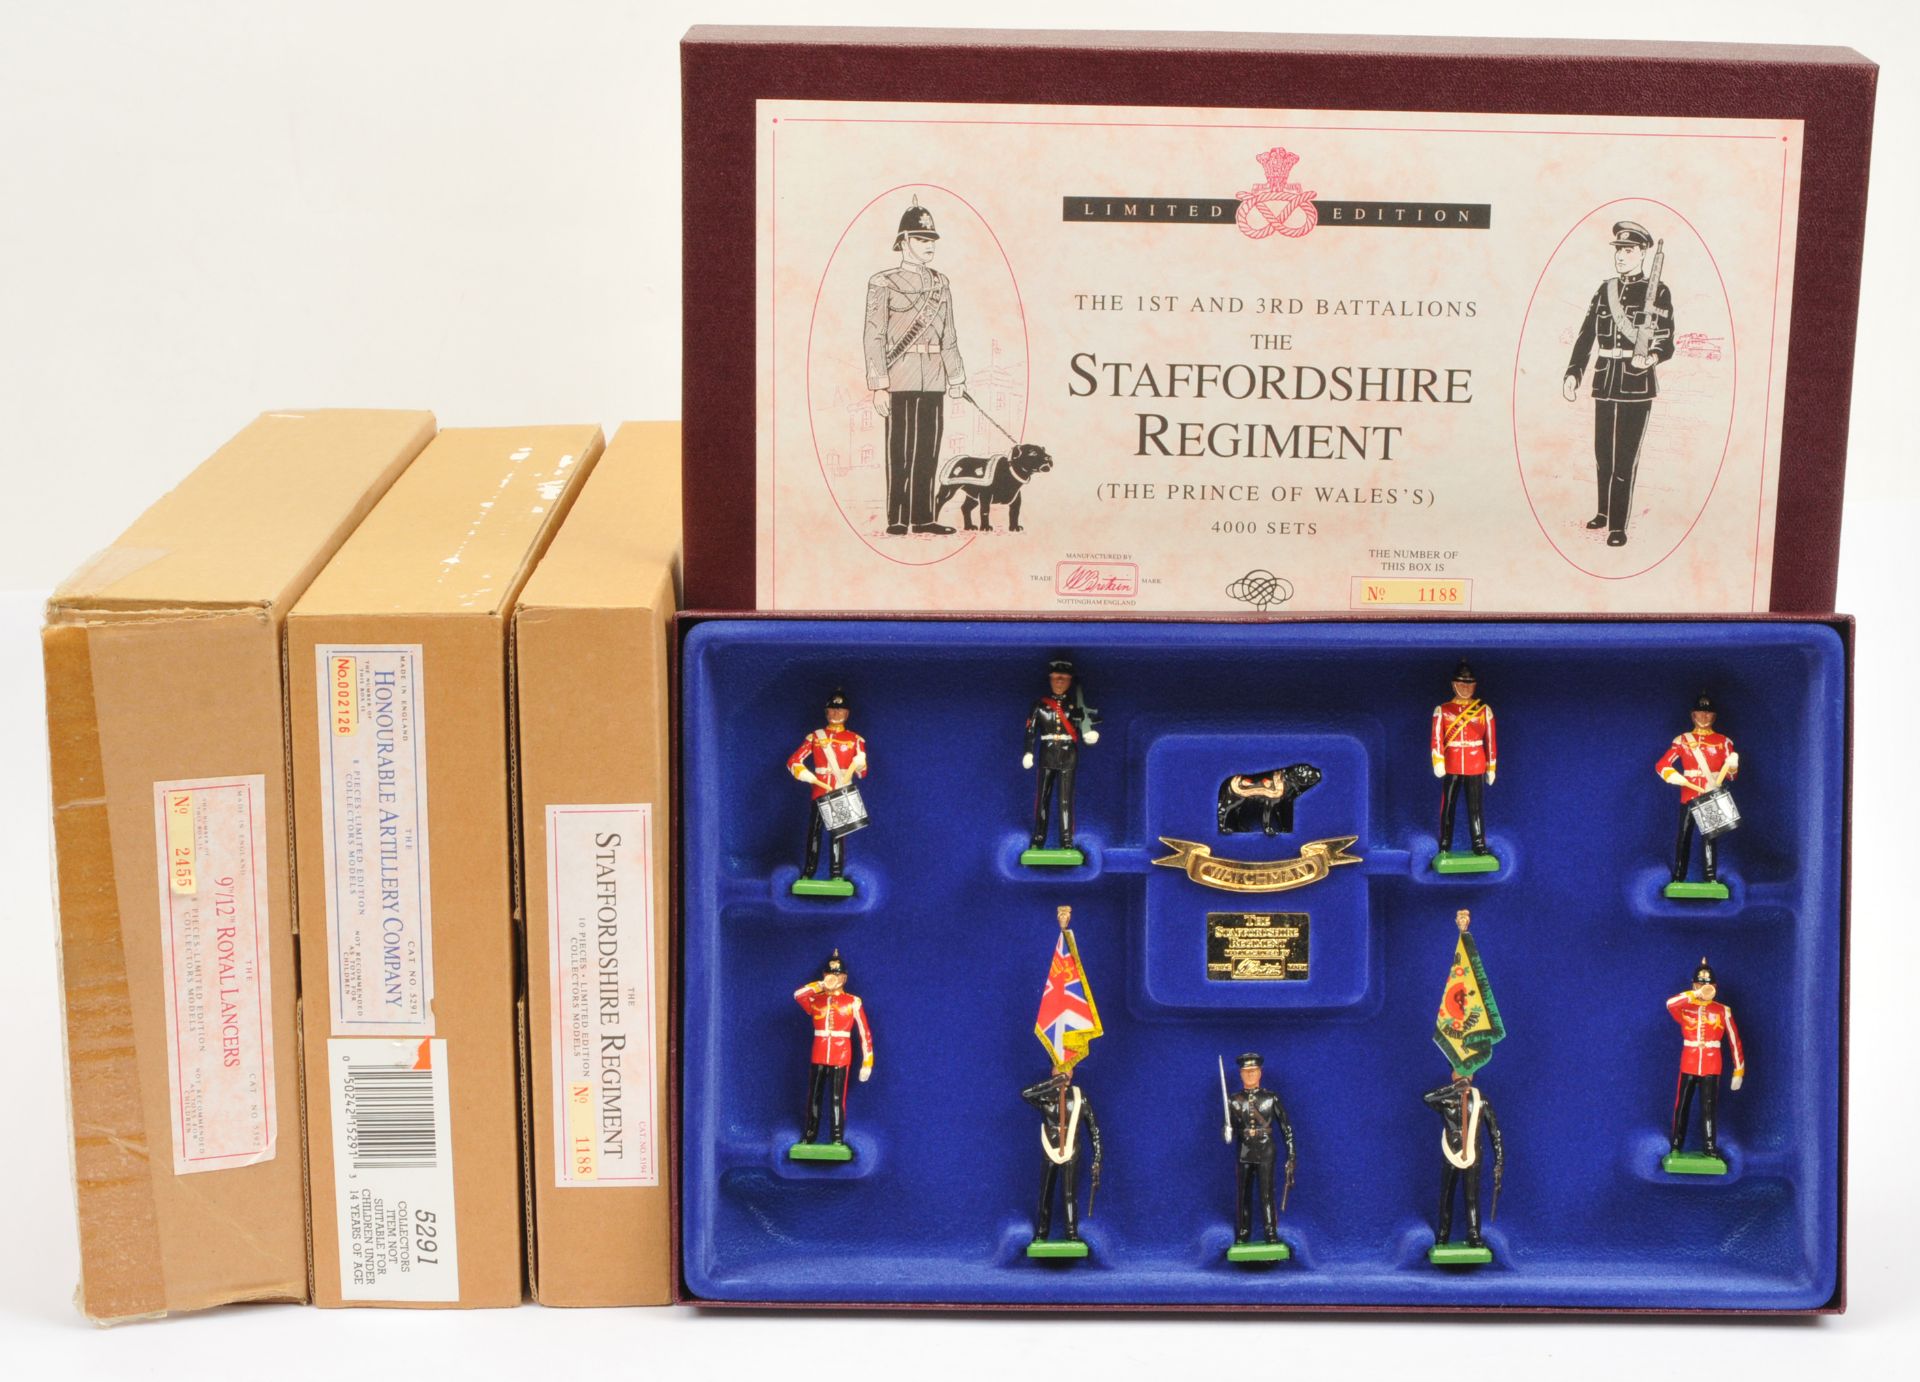 Britains Limited Editions, comprising: Set 5291 - The Honourable Artillery Company